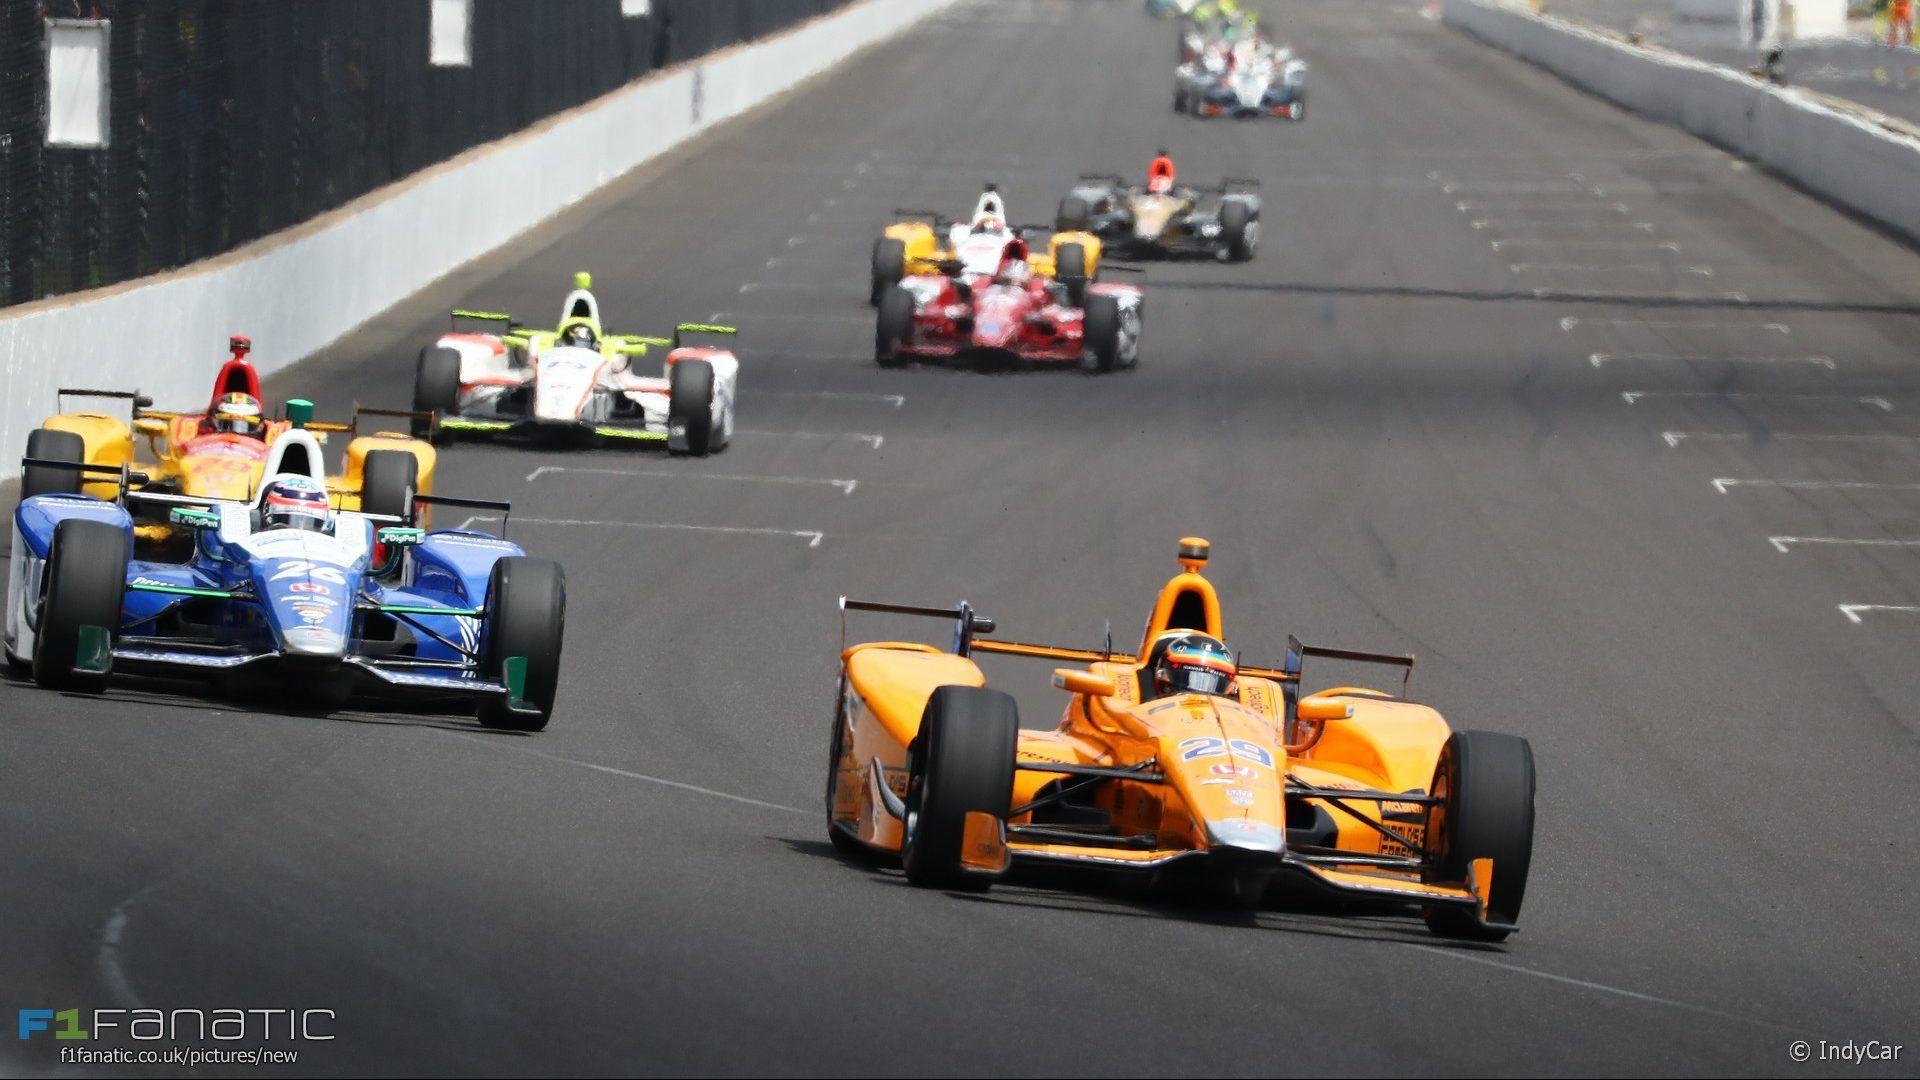 Weekend Racing Wrap: Engine failure ends Alonso's Indianapolis 500